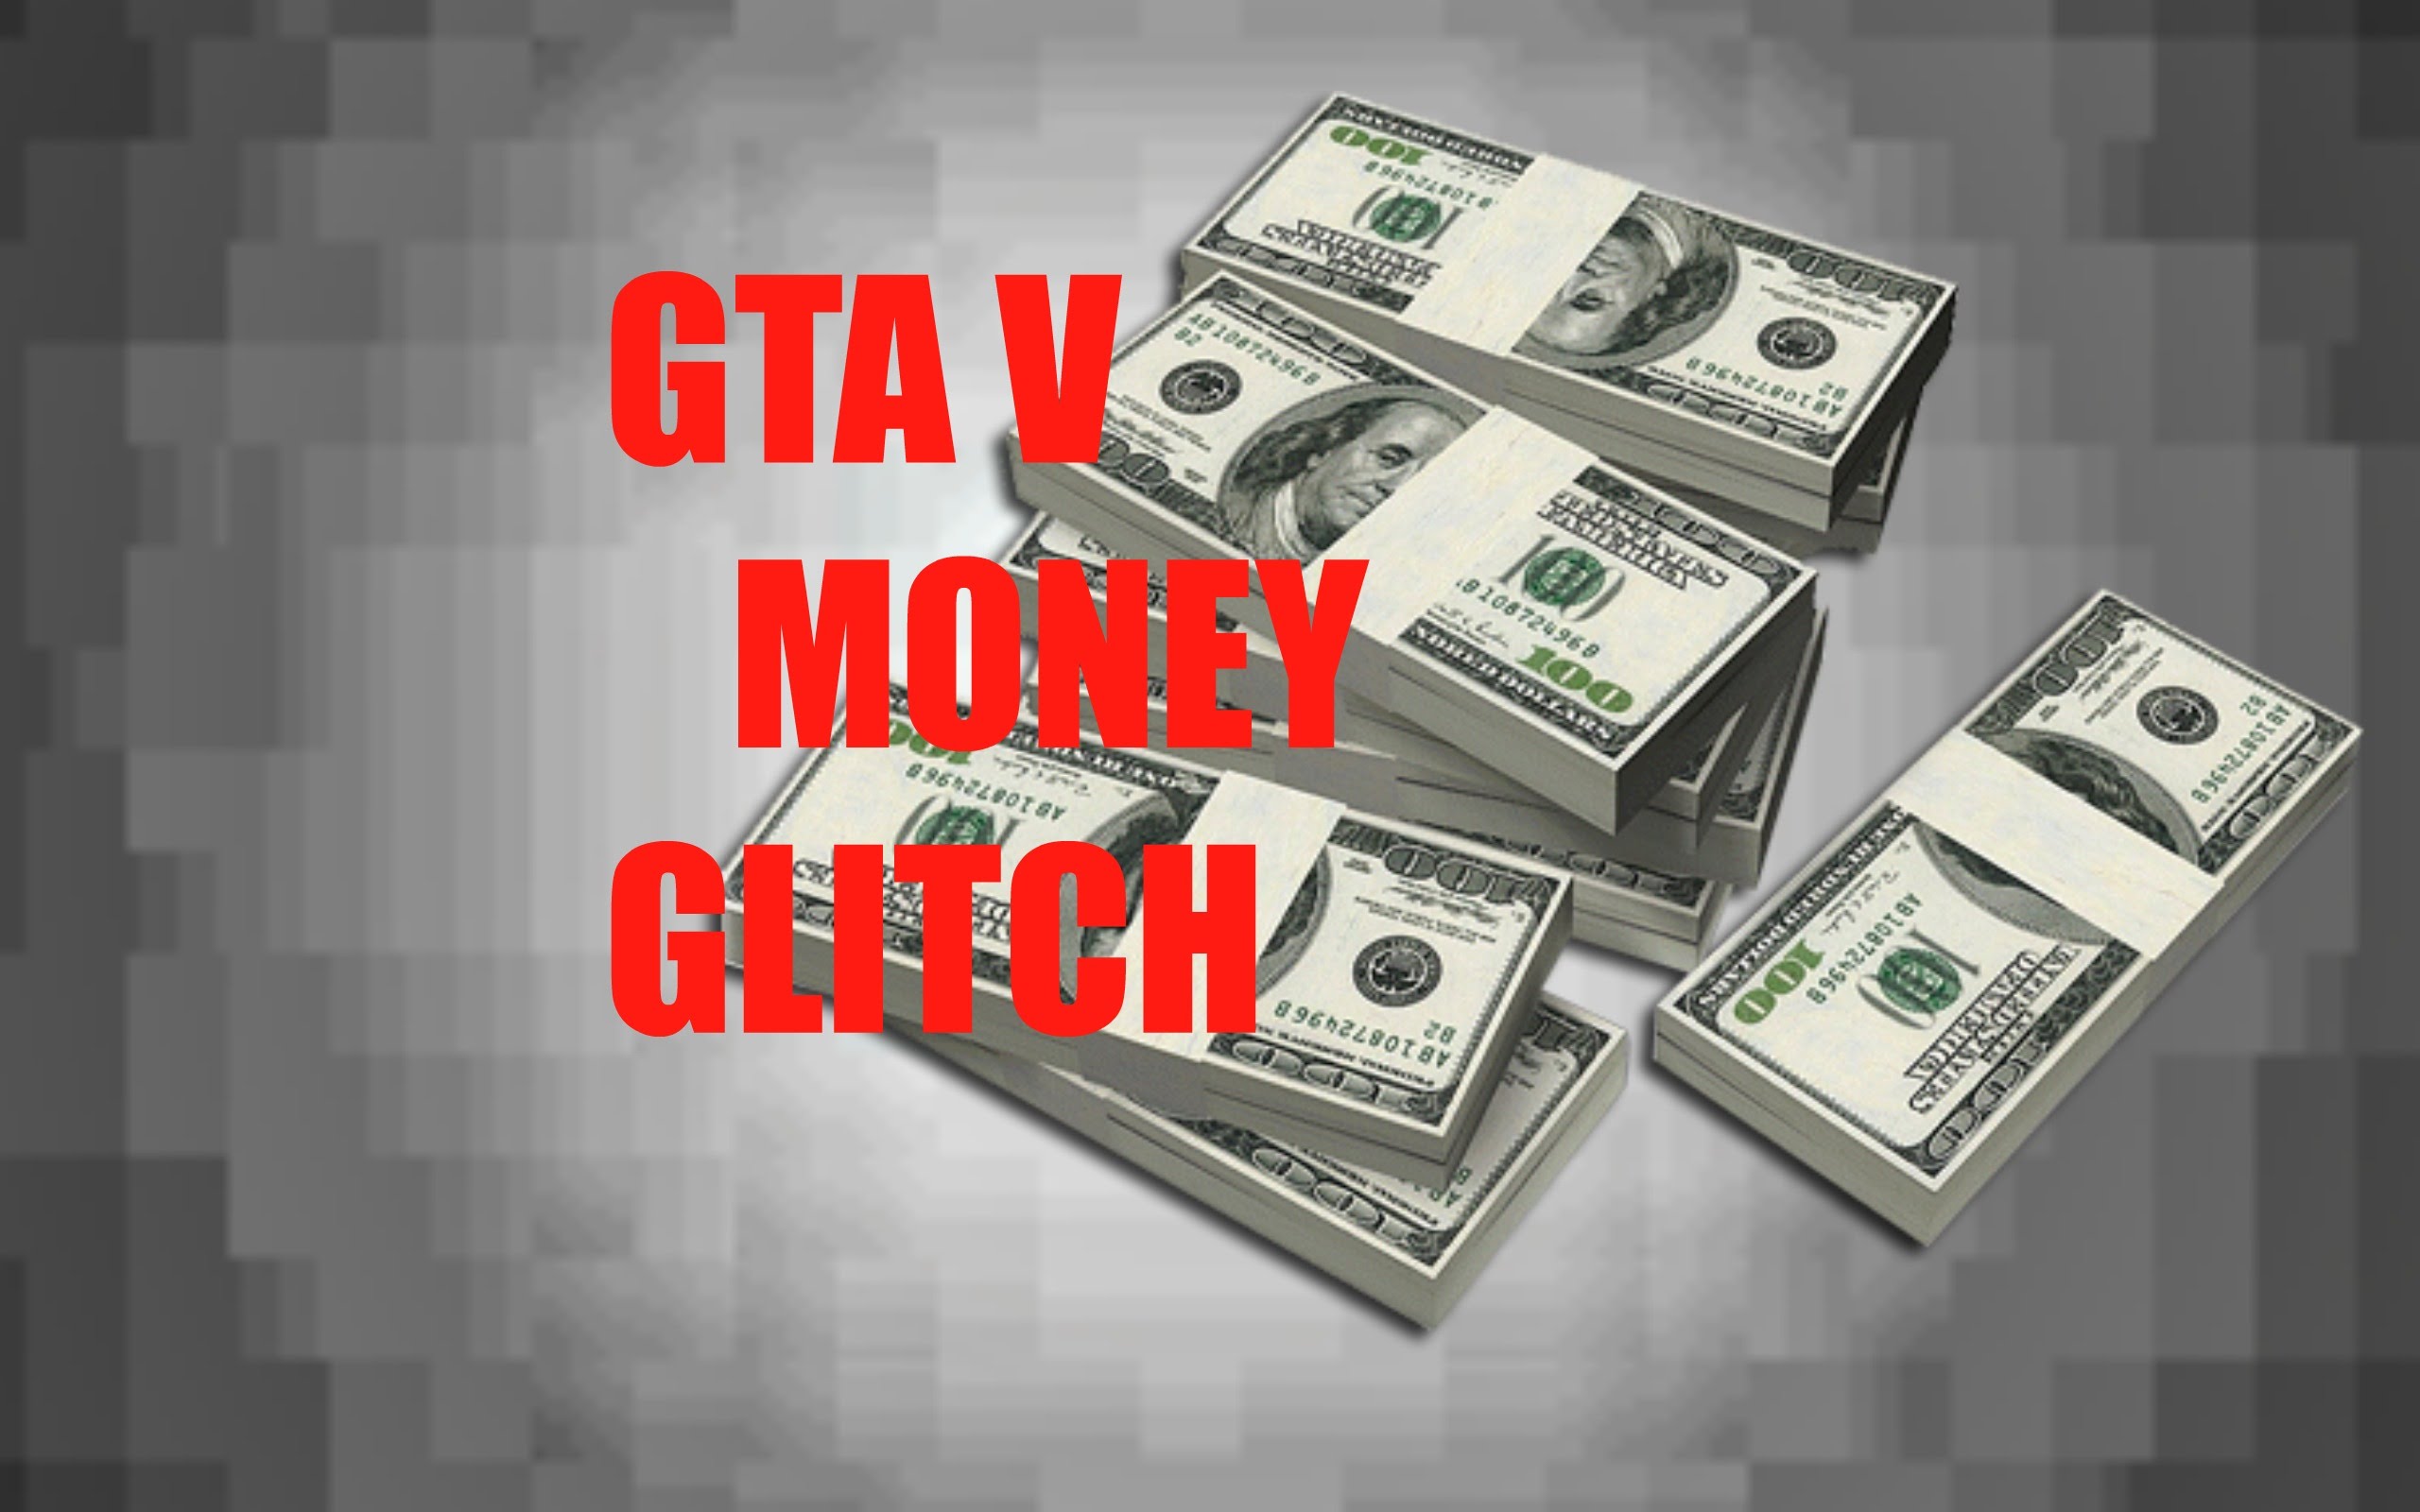 Gta V Money Cheat – Is There Anything Like That